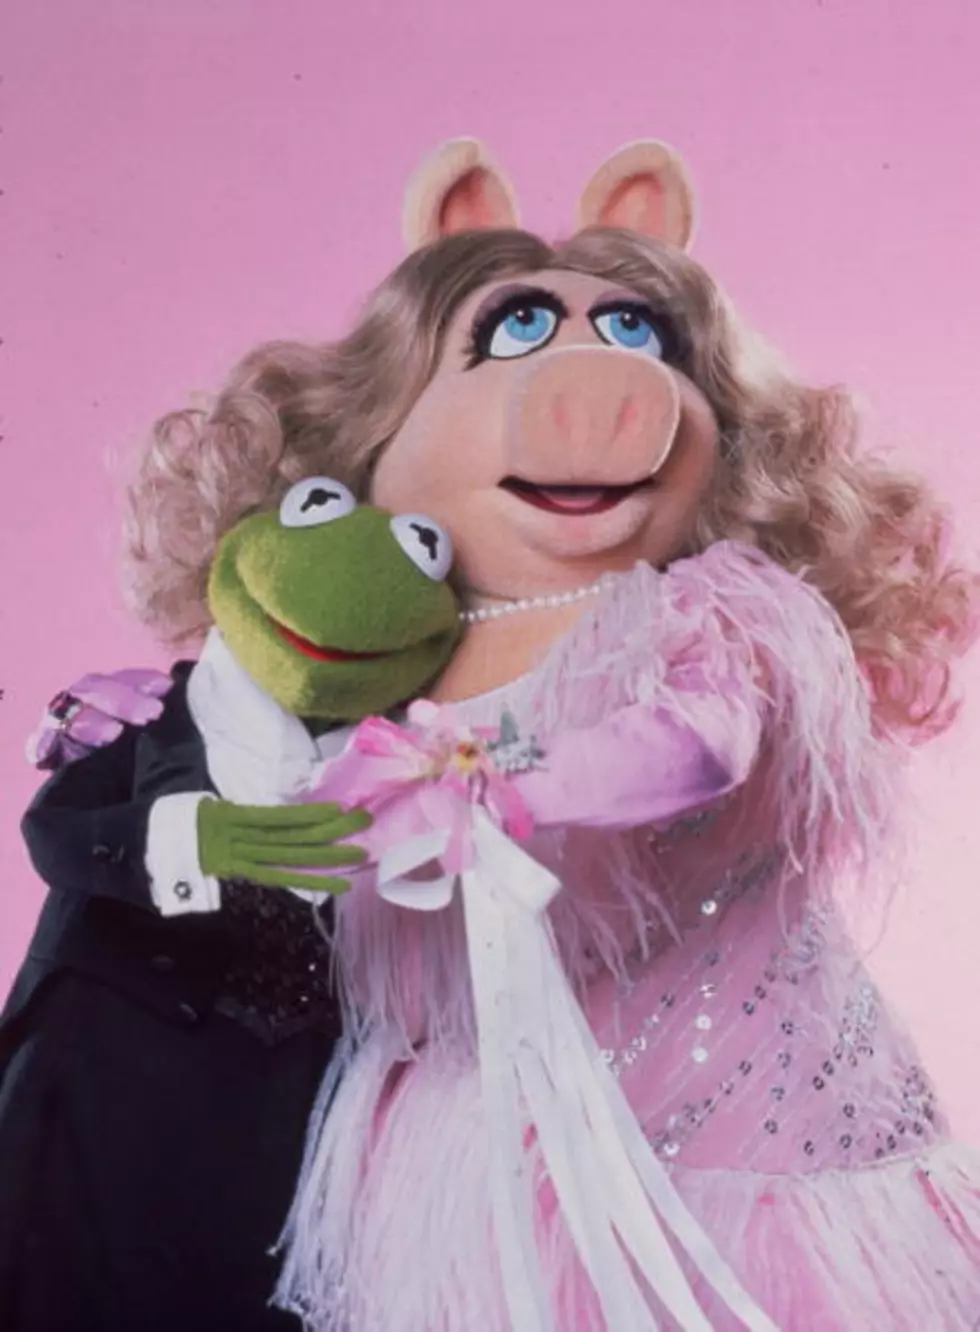 ‘The Muppets’ A’cappella Version of ‘Cool Kids’ By Echosmith [VIDEO]